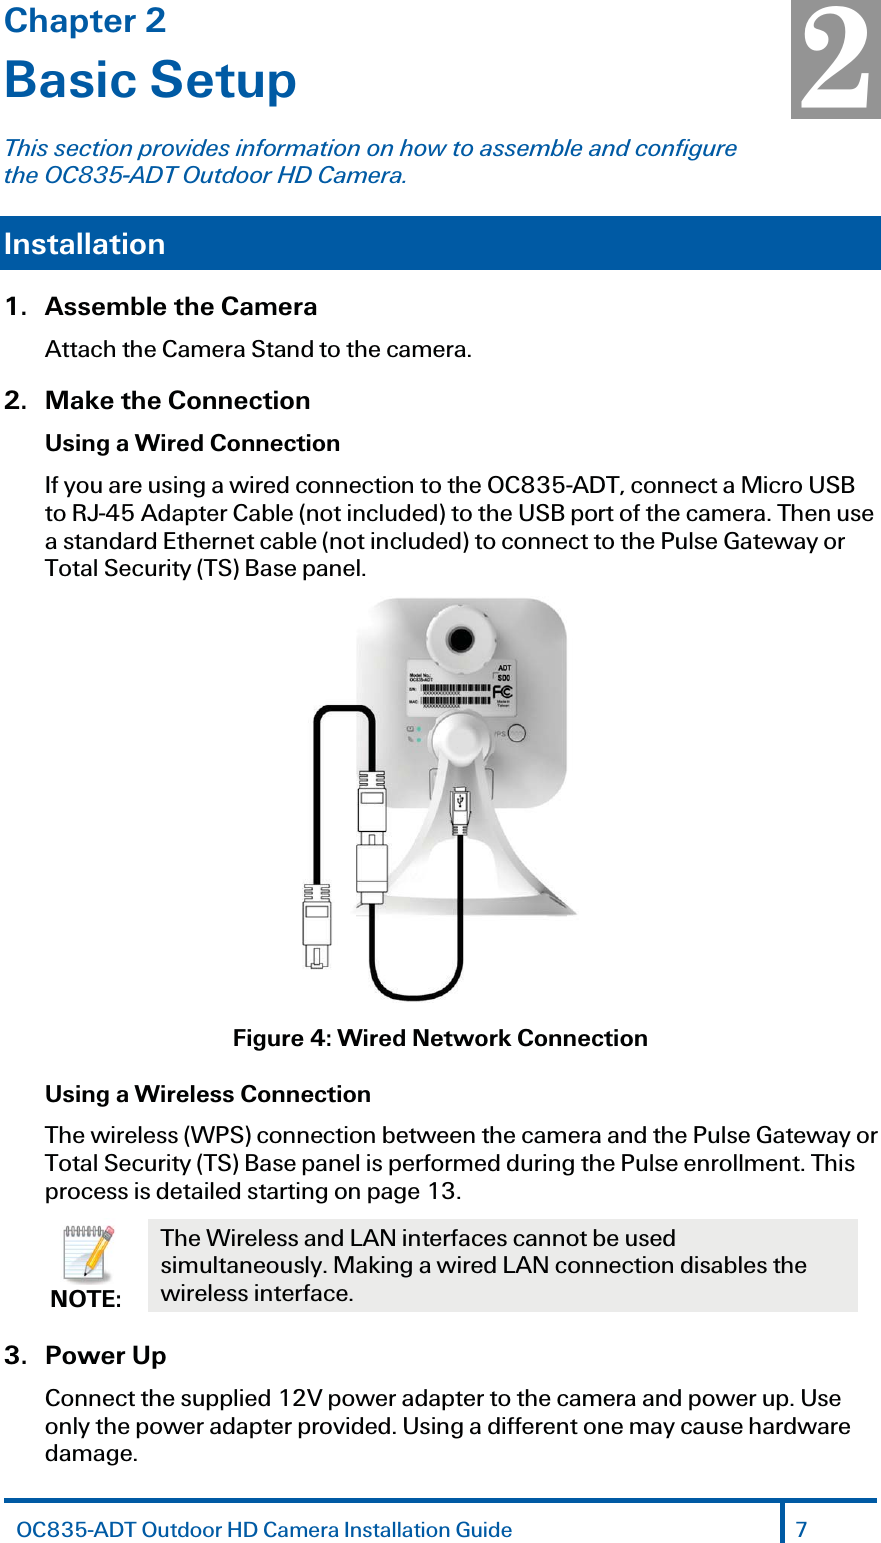 Chapter 2 Basic Setup This section provides information on how to assemble and configure the OC835-ADT Outdoor HD Camera. Installation  1.  Assemble the Camera Attach the Camera Stand to the camera.2. Make the Connection Using a Wired Connection If you are using a wired connection to the OC835-ADT, connect a Micro USB to RJ-45 Adapter Cable (not included) to the USB port of the camera. Then use a standard Ethernet cable (not included) to connect to the Pulse Gateway or Total Security (TS) Base panel.  Figure 4: Wired Network Connection Using a Wireless Connection The wireless (WPS) connection between the camera and the Pulse Gateway or Total Security (TS) Base panel is performed during the Pulse enrollment. This process is detailed starting on page 13.  NOTE: The Wireless and LAN interfaces cannot be used simultaneously. Making a wired LAN connection disables the wireless interface. 3.   Power Up Connect the supplied 12V power adapter to the camera and power up. Use only the power adapter provided. Using a different one may cause hardware damage. 2 OC835-ADT Outdoor HD Camera Installation Guide 7 